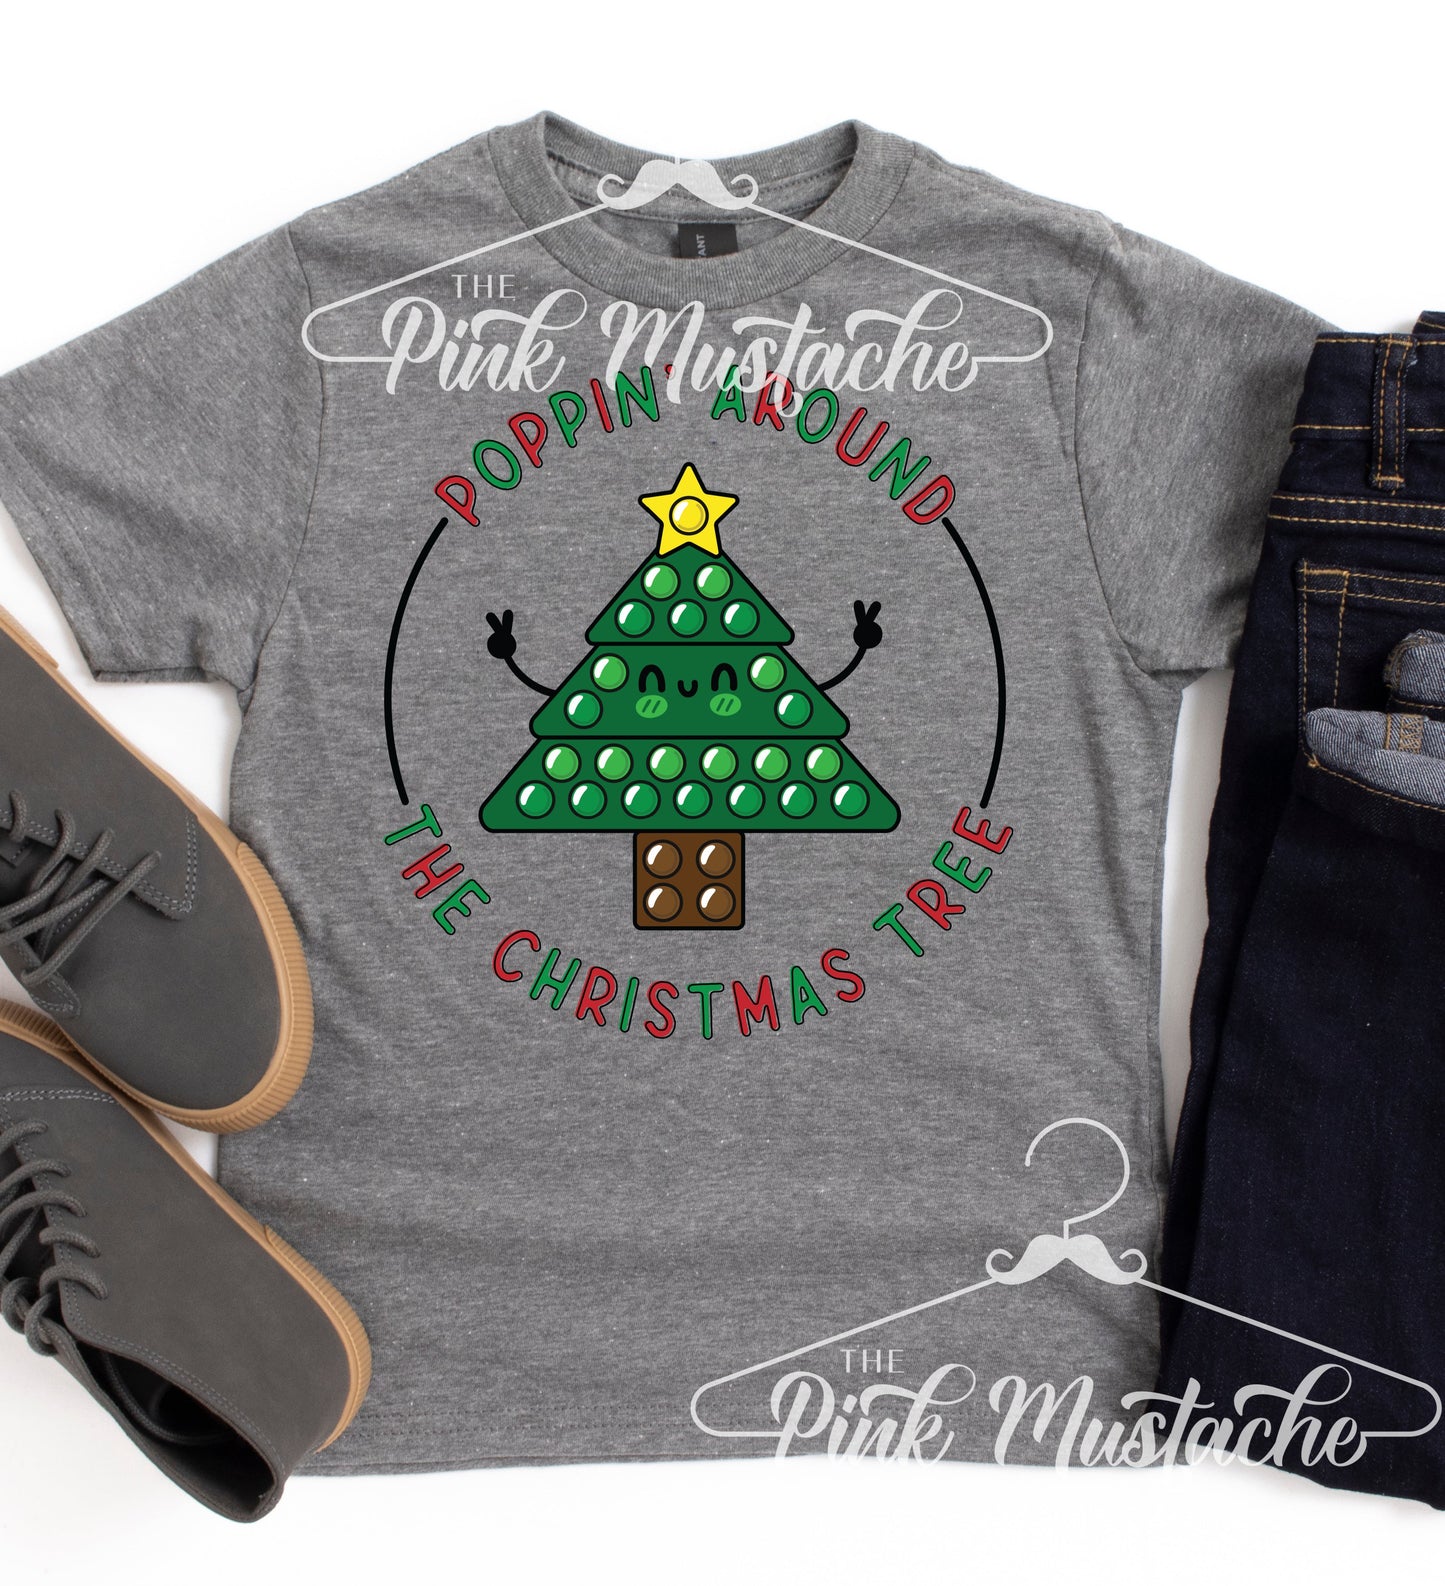 Poppin' Around The Christmas Tree Tee/ Softstlye/ Toddler, Youth, and Adult Sizes